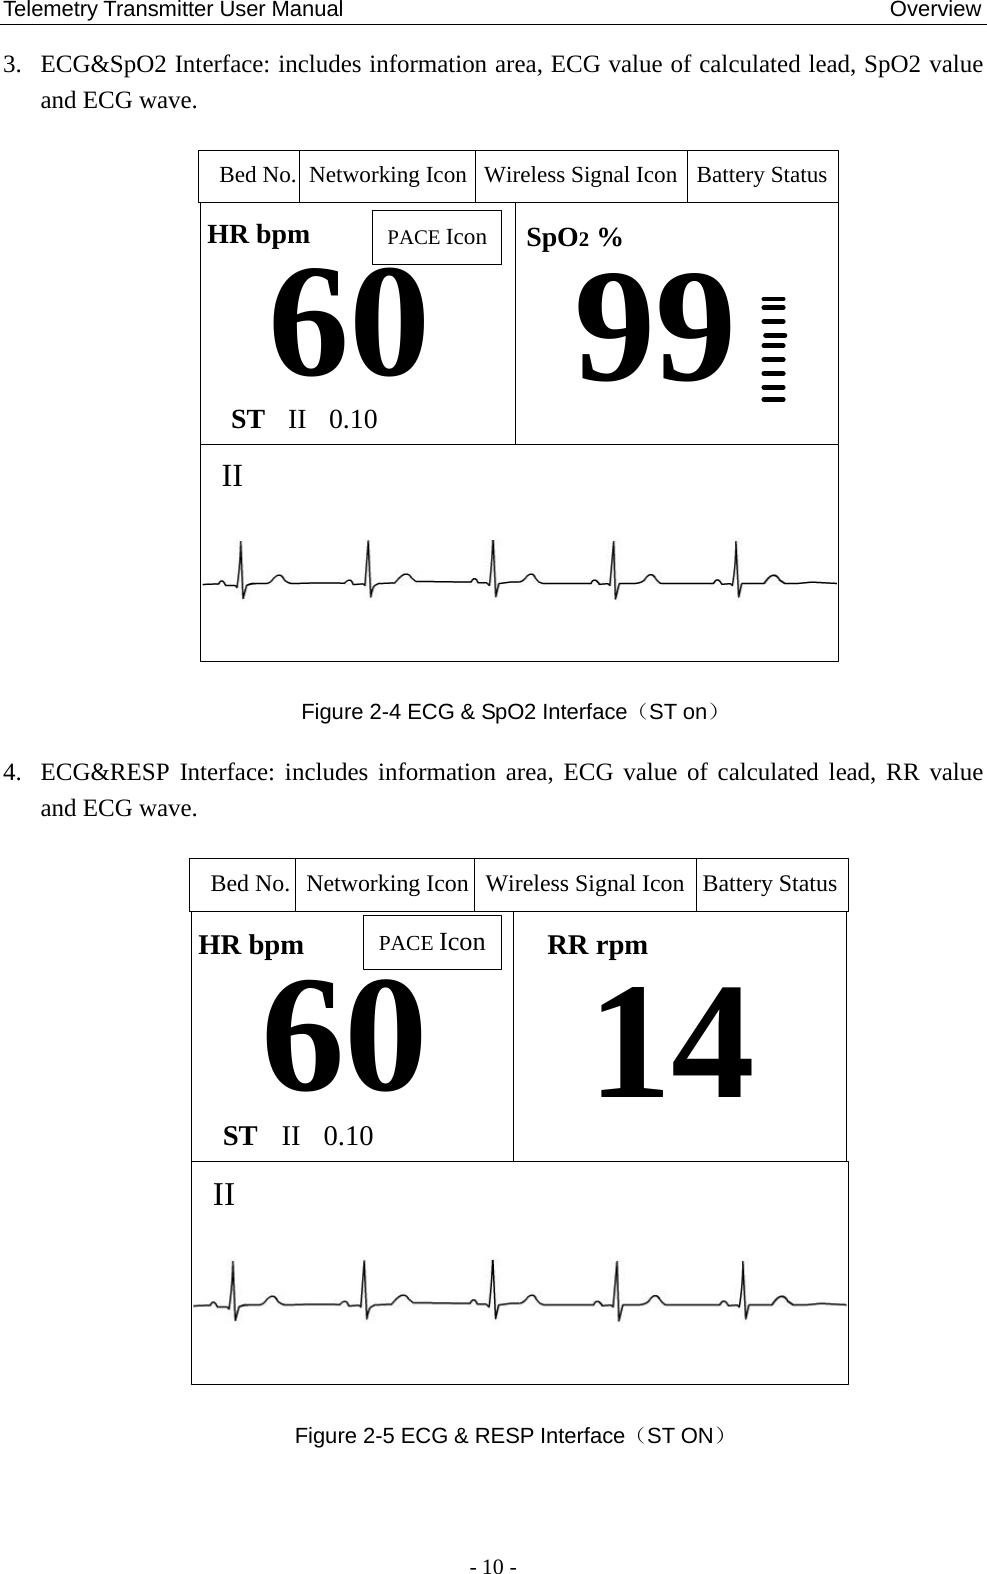 Telemetry Transmitter User Manual                                                  Overview 3. ECG&amp;SpO2 Interface: includes information area, ECG value of calculated lead, SpO2 value and ECG wave. 60 SpO2 %99HR bpmIIST II 0.10PACE IconBed No. Networking Icon Battery StatusWireless Signal Icon Figure 2-4 ECG &amp; SpO2 Interface（ST on） 4. ECG&amp;RESP Interface: includes information area, ECG value of calculated lead, RR value and ECG wave. 60 RR rpm14HR bpmIIST II 0.10PACE IconBed No. Networking Icon Battery StatusWireless Signal Icon Figure 2-5 ECG &amp; RESP Interface（ST ON）   - 10 - 